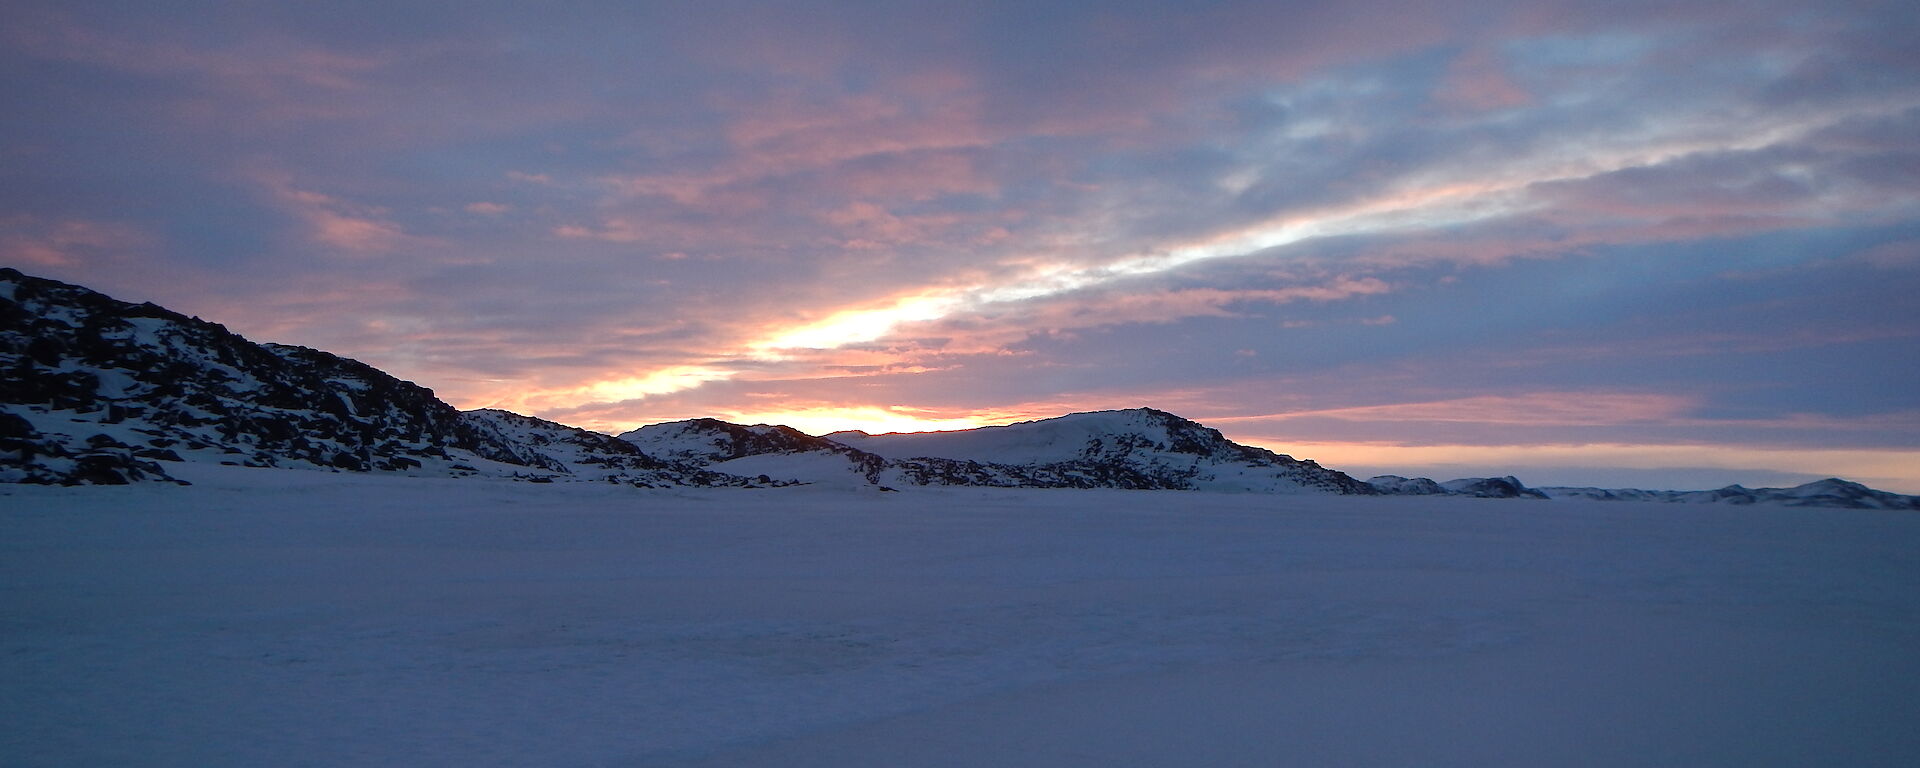 Sky and frozen ocean with mountains with some orange colours showing through the clouds